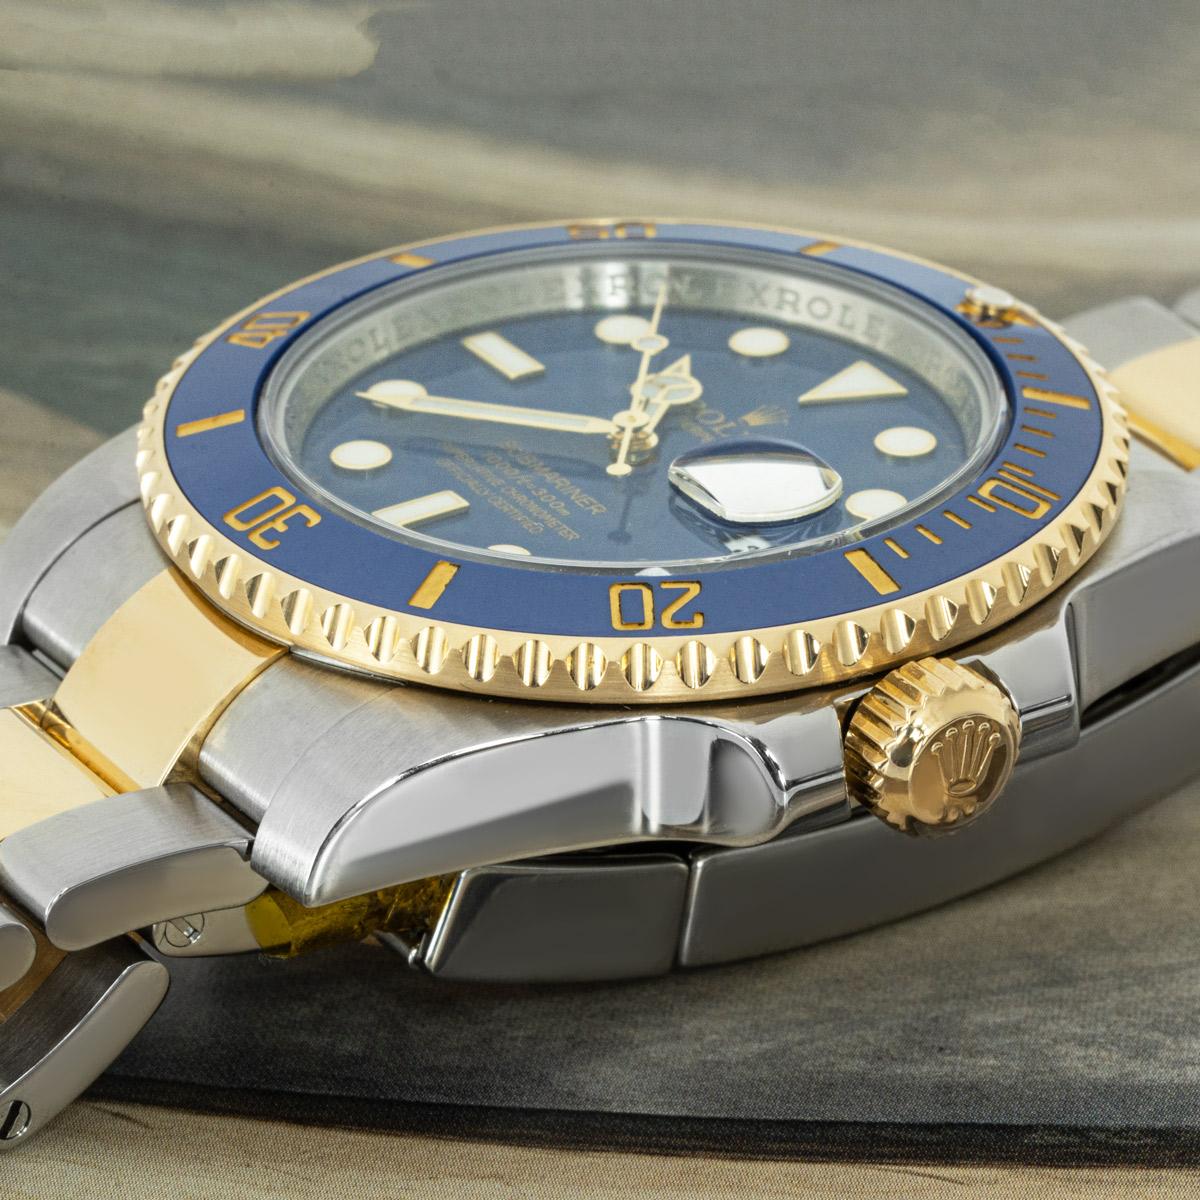 A 40mm Submariner Date in Oystersteel and yellow gold by Rolex. Featuring a blue dial with applied hour markers and a yellow gold uni-directional rotatable bezel which has a blue ceramic insert, with 60-minute graduations coated in gold.

Fitted